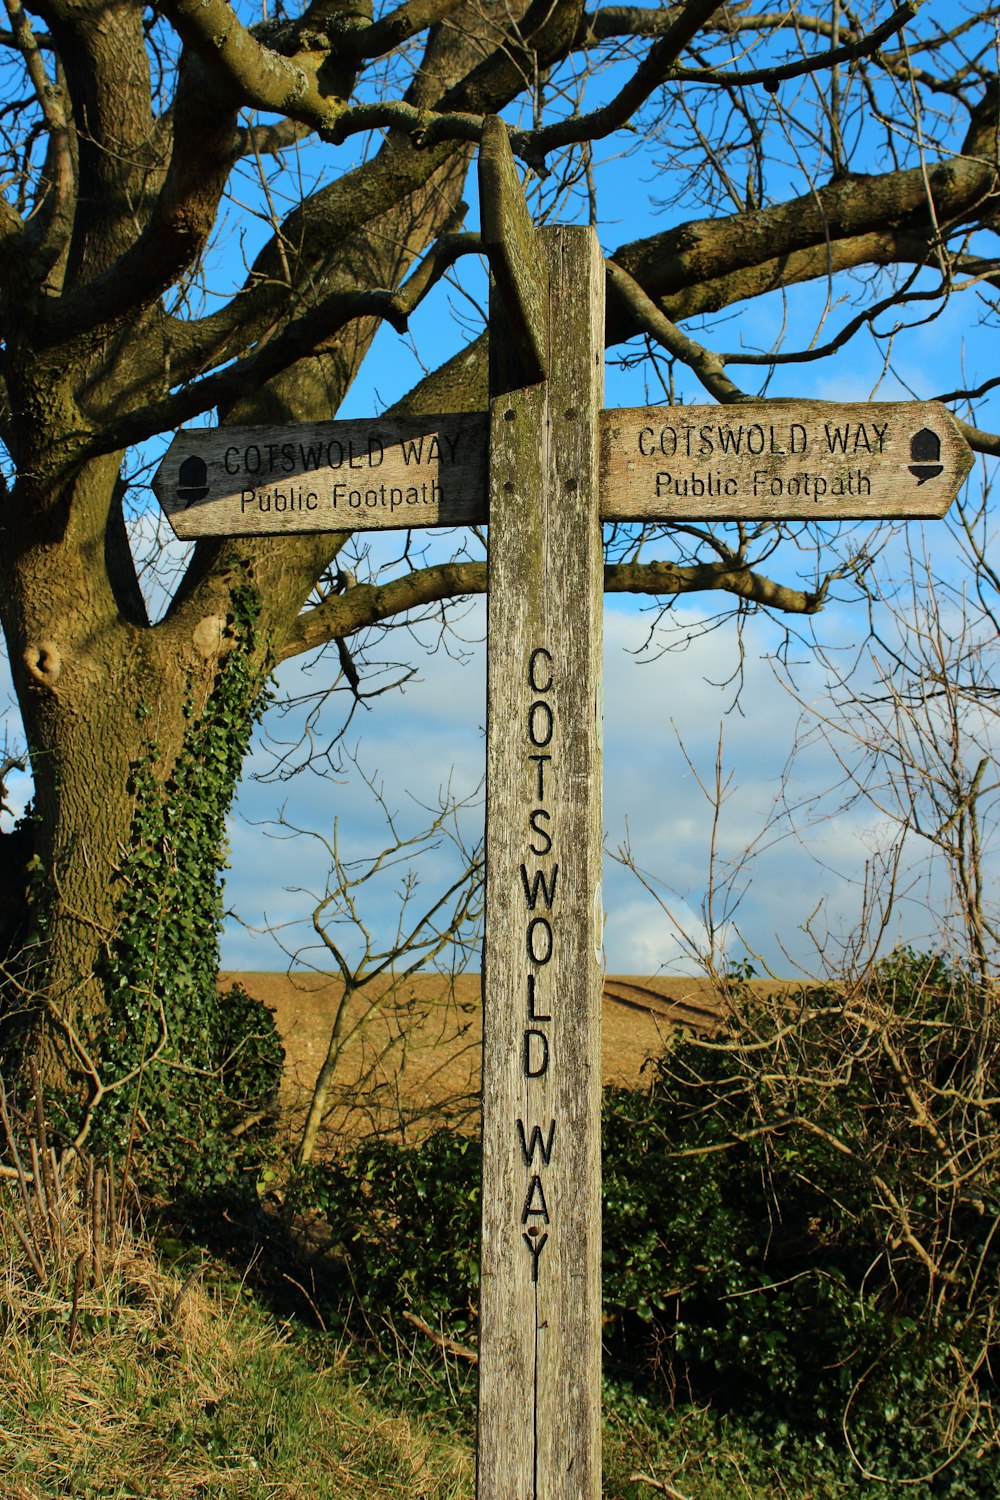 a wooden sign pointing in different directions in front of a tree